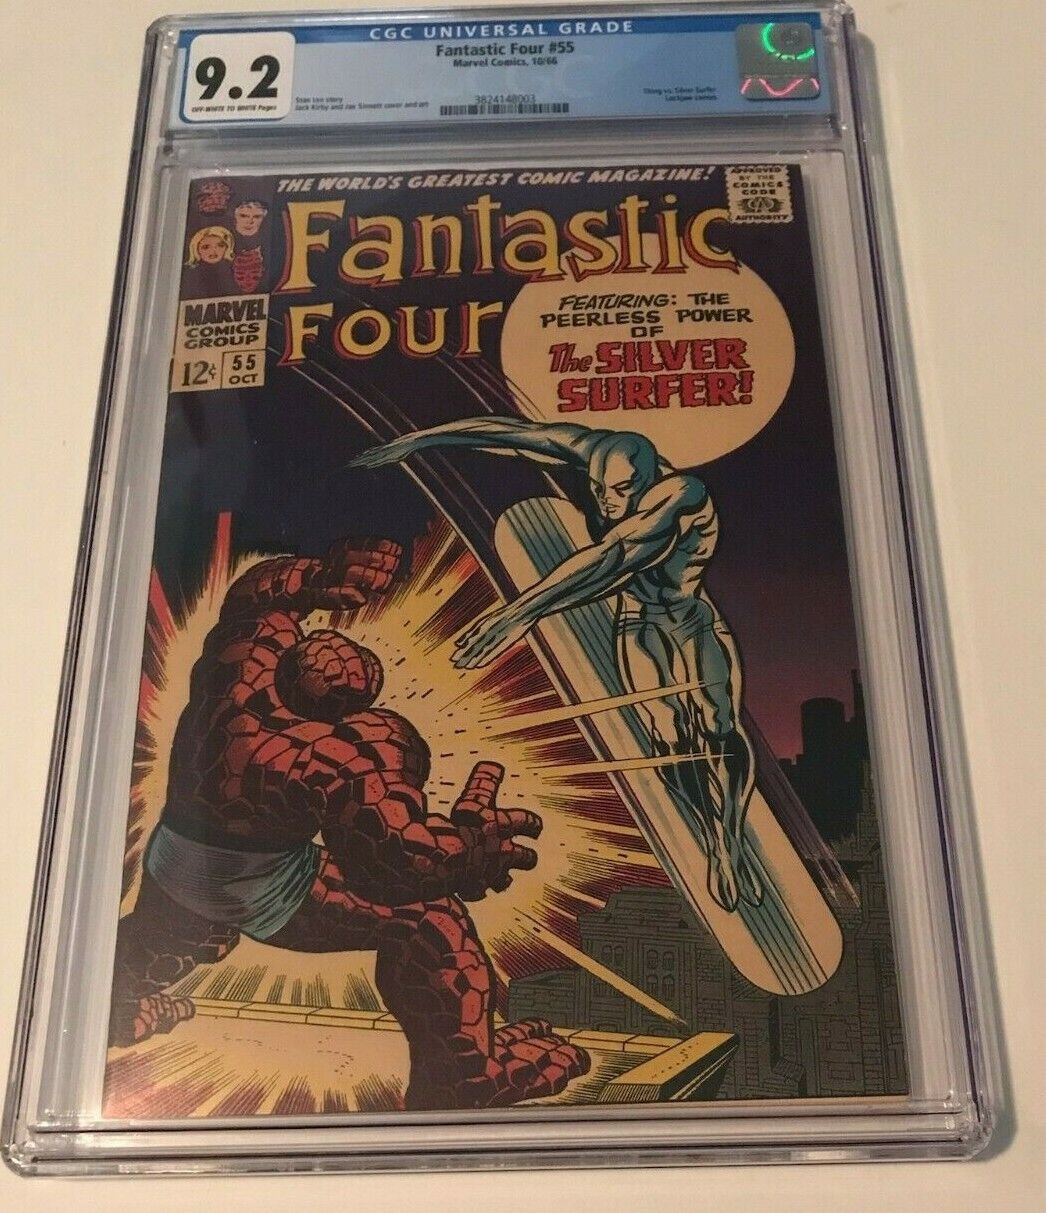 Marvel Comics Fantastic Four 55 CGC 92 OWW CLASSIC THING SILVER SURFER COVER